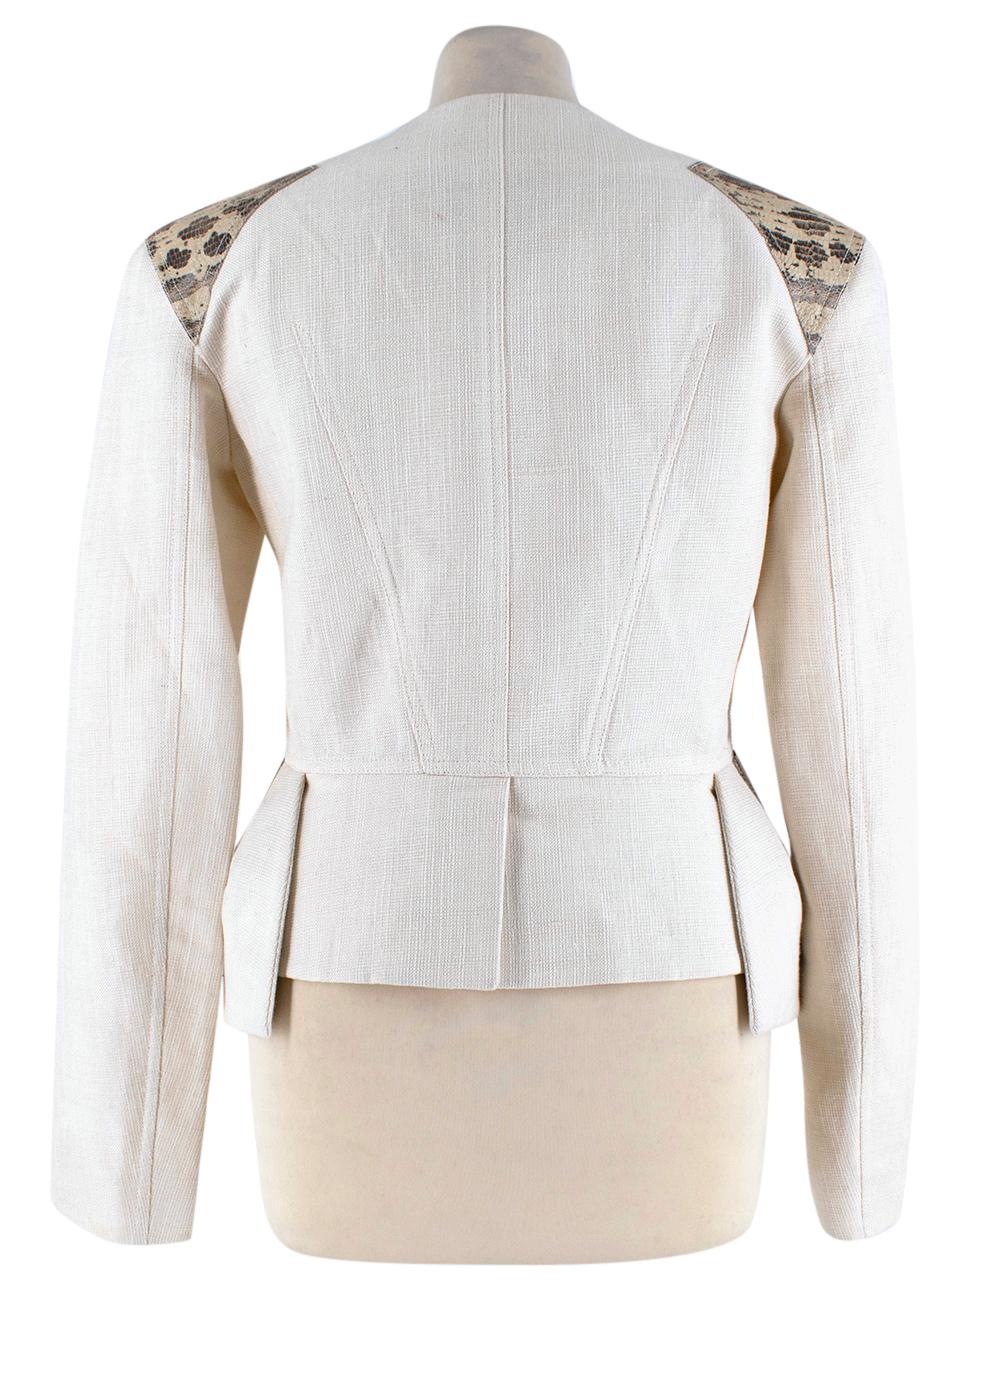 Gray Tom Ford Cream Linen Jacket with Lizard Embossed Patches - Size US 4 For Sale